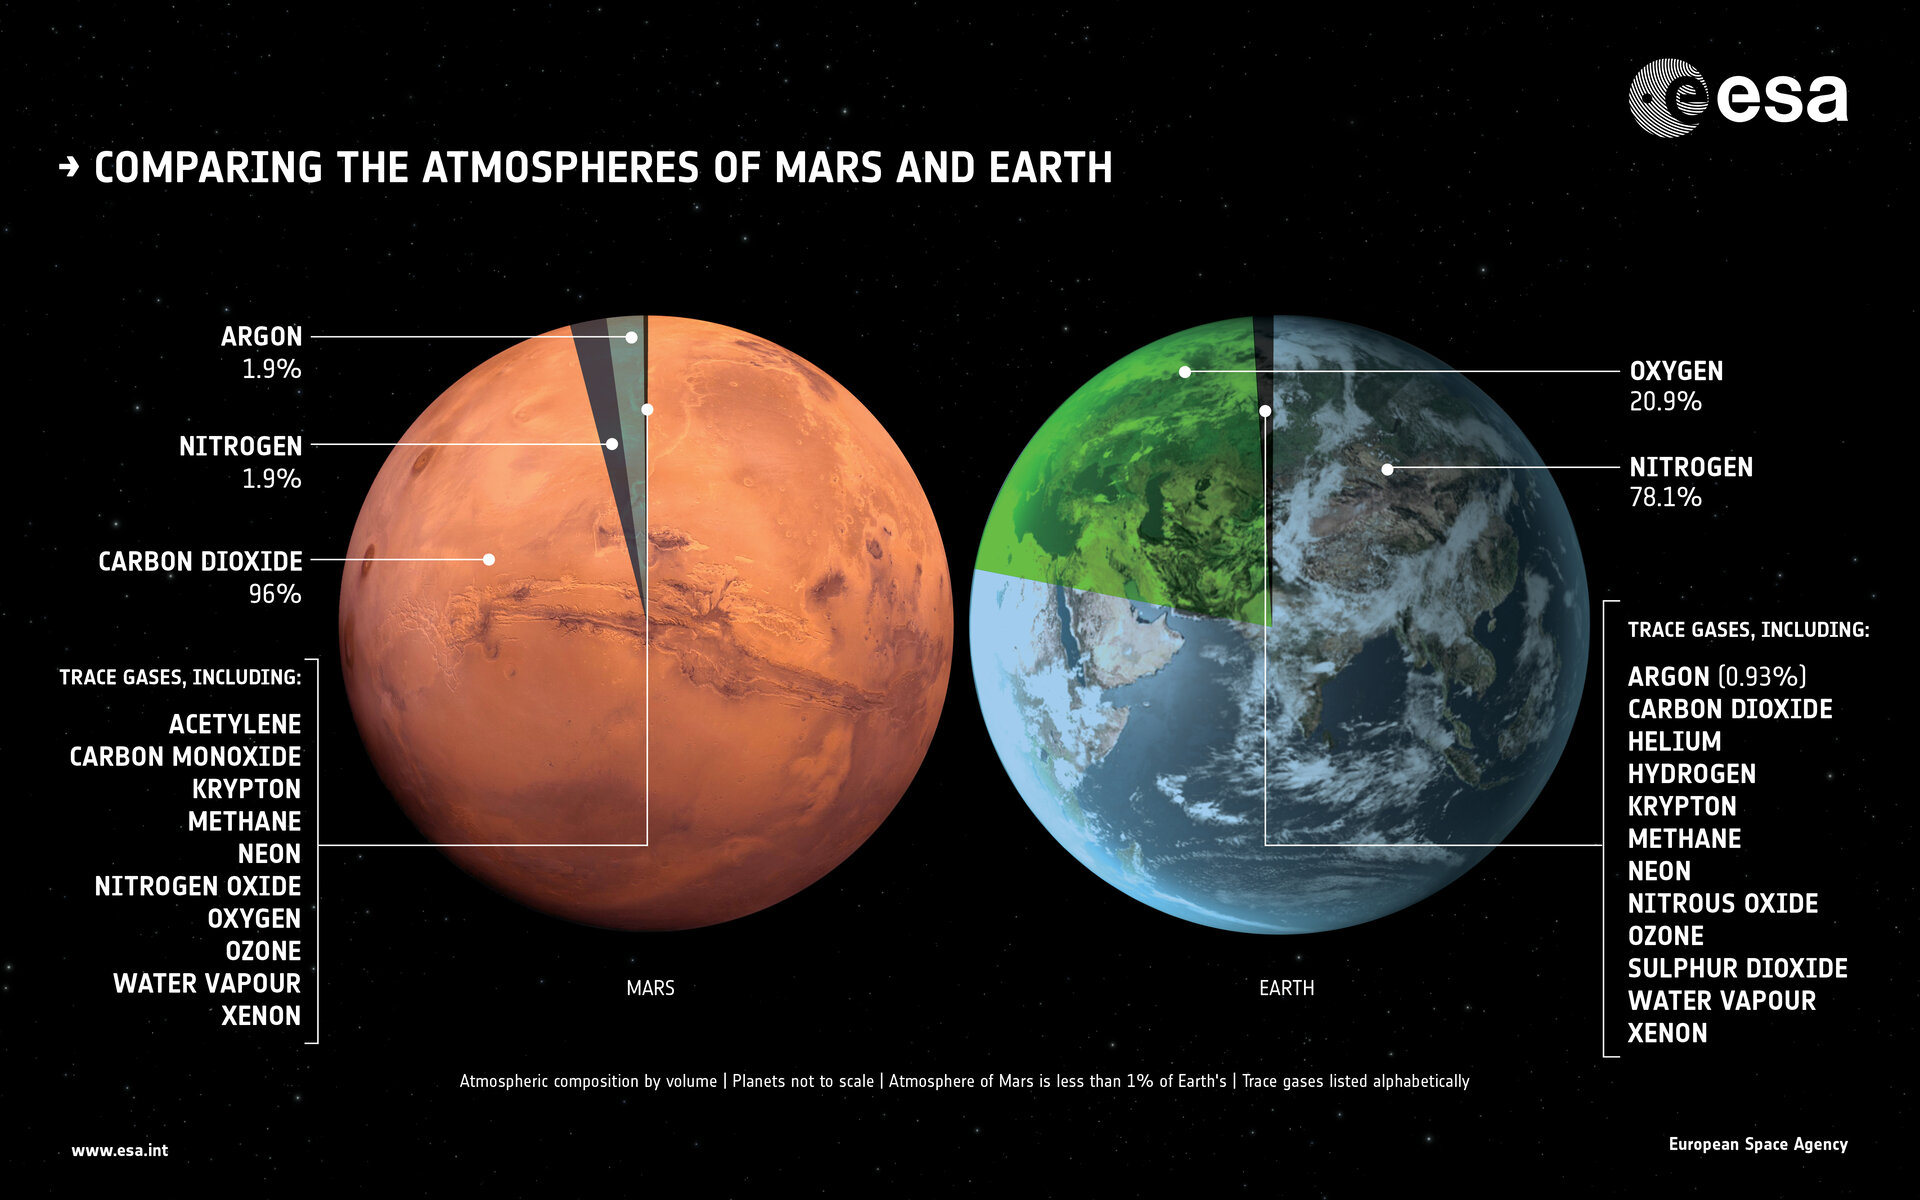 Comparing the atmospheres of Mars and Earth